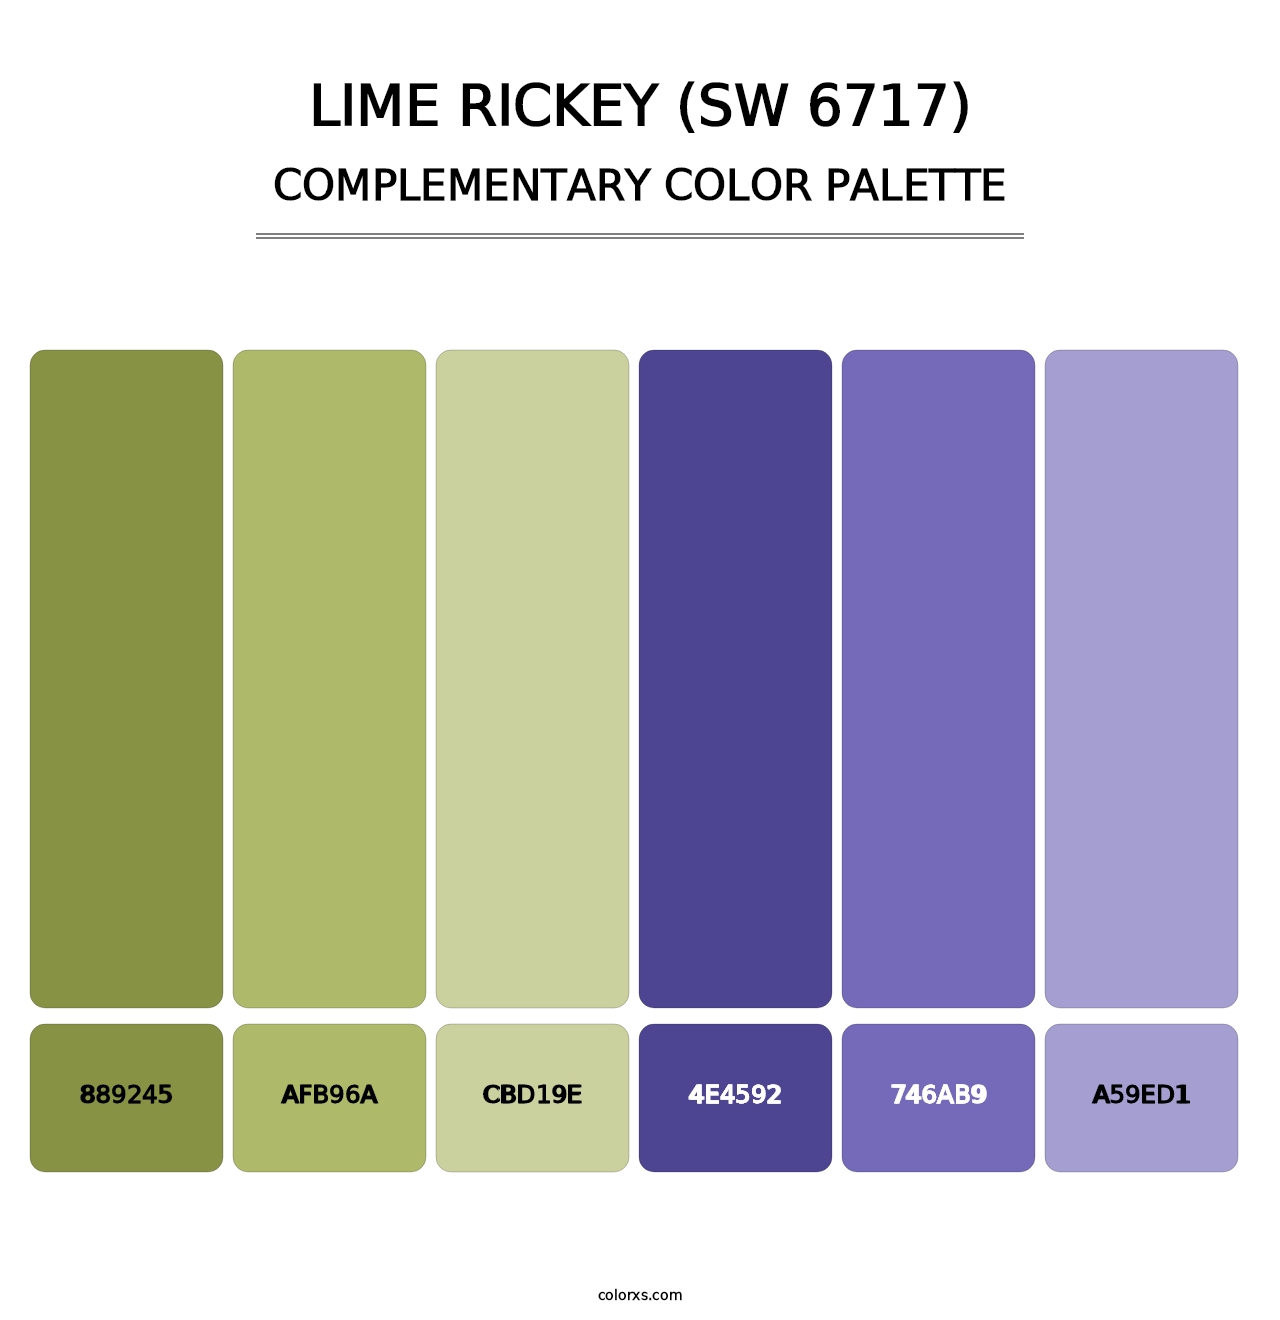 Lime Rickey (SW 6717) - Complementary Color Palette